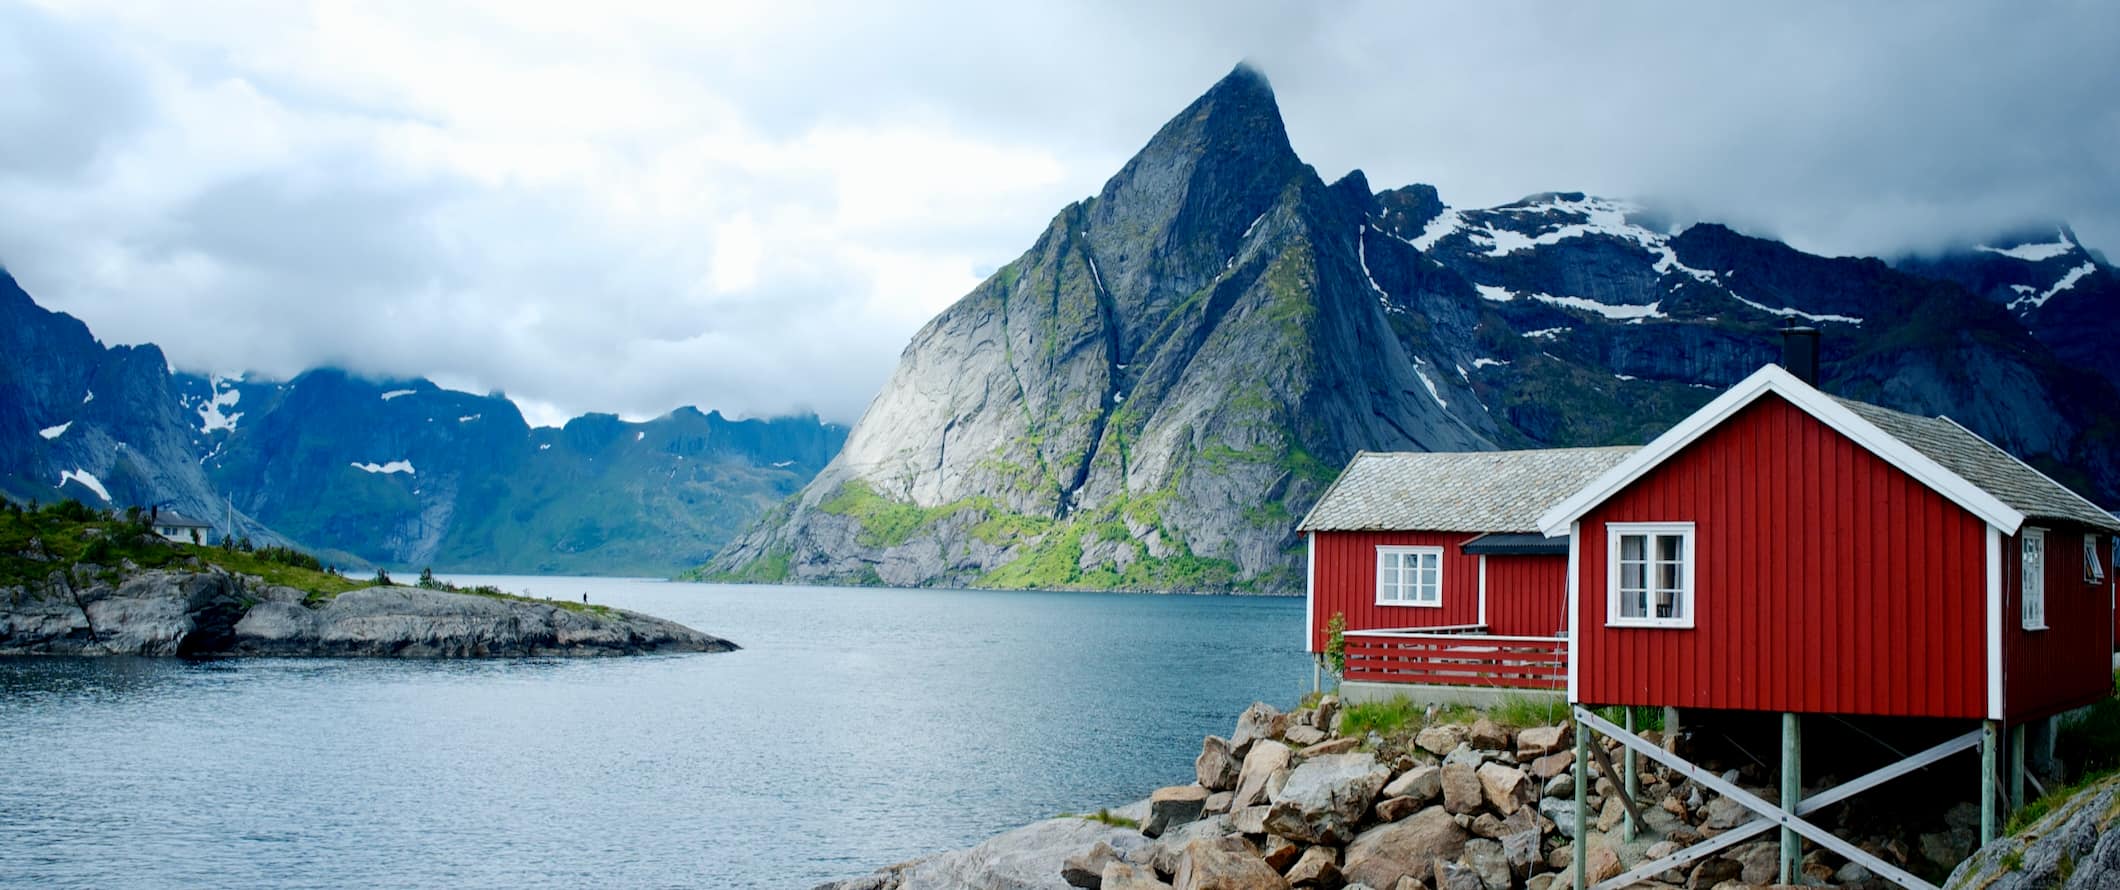 scenic fjords in Norway with a red cabin in the foreground along the rugged coastline